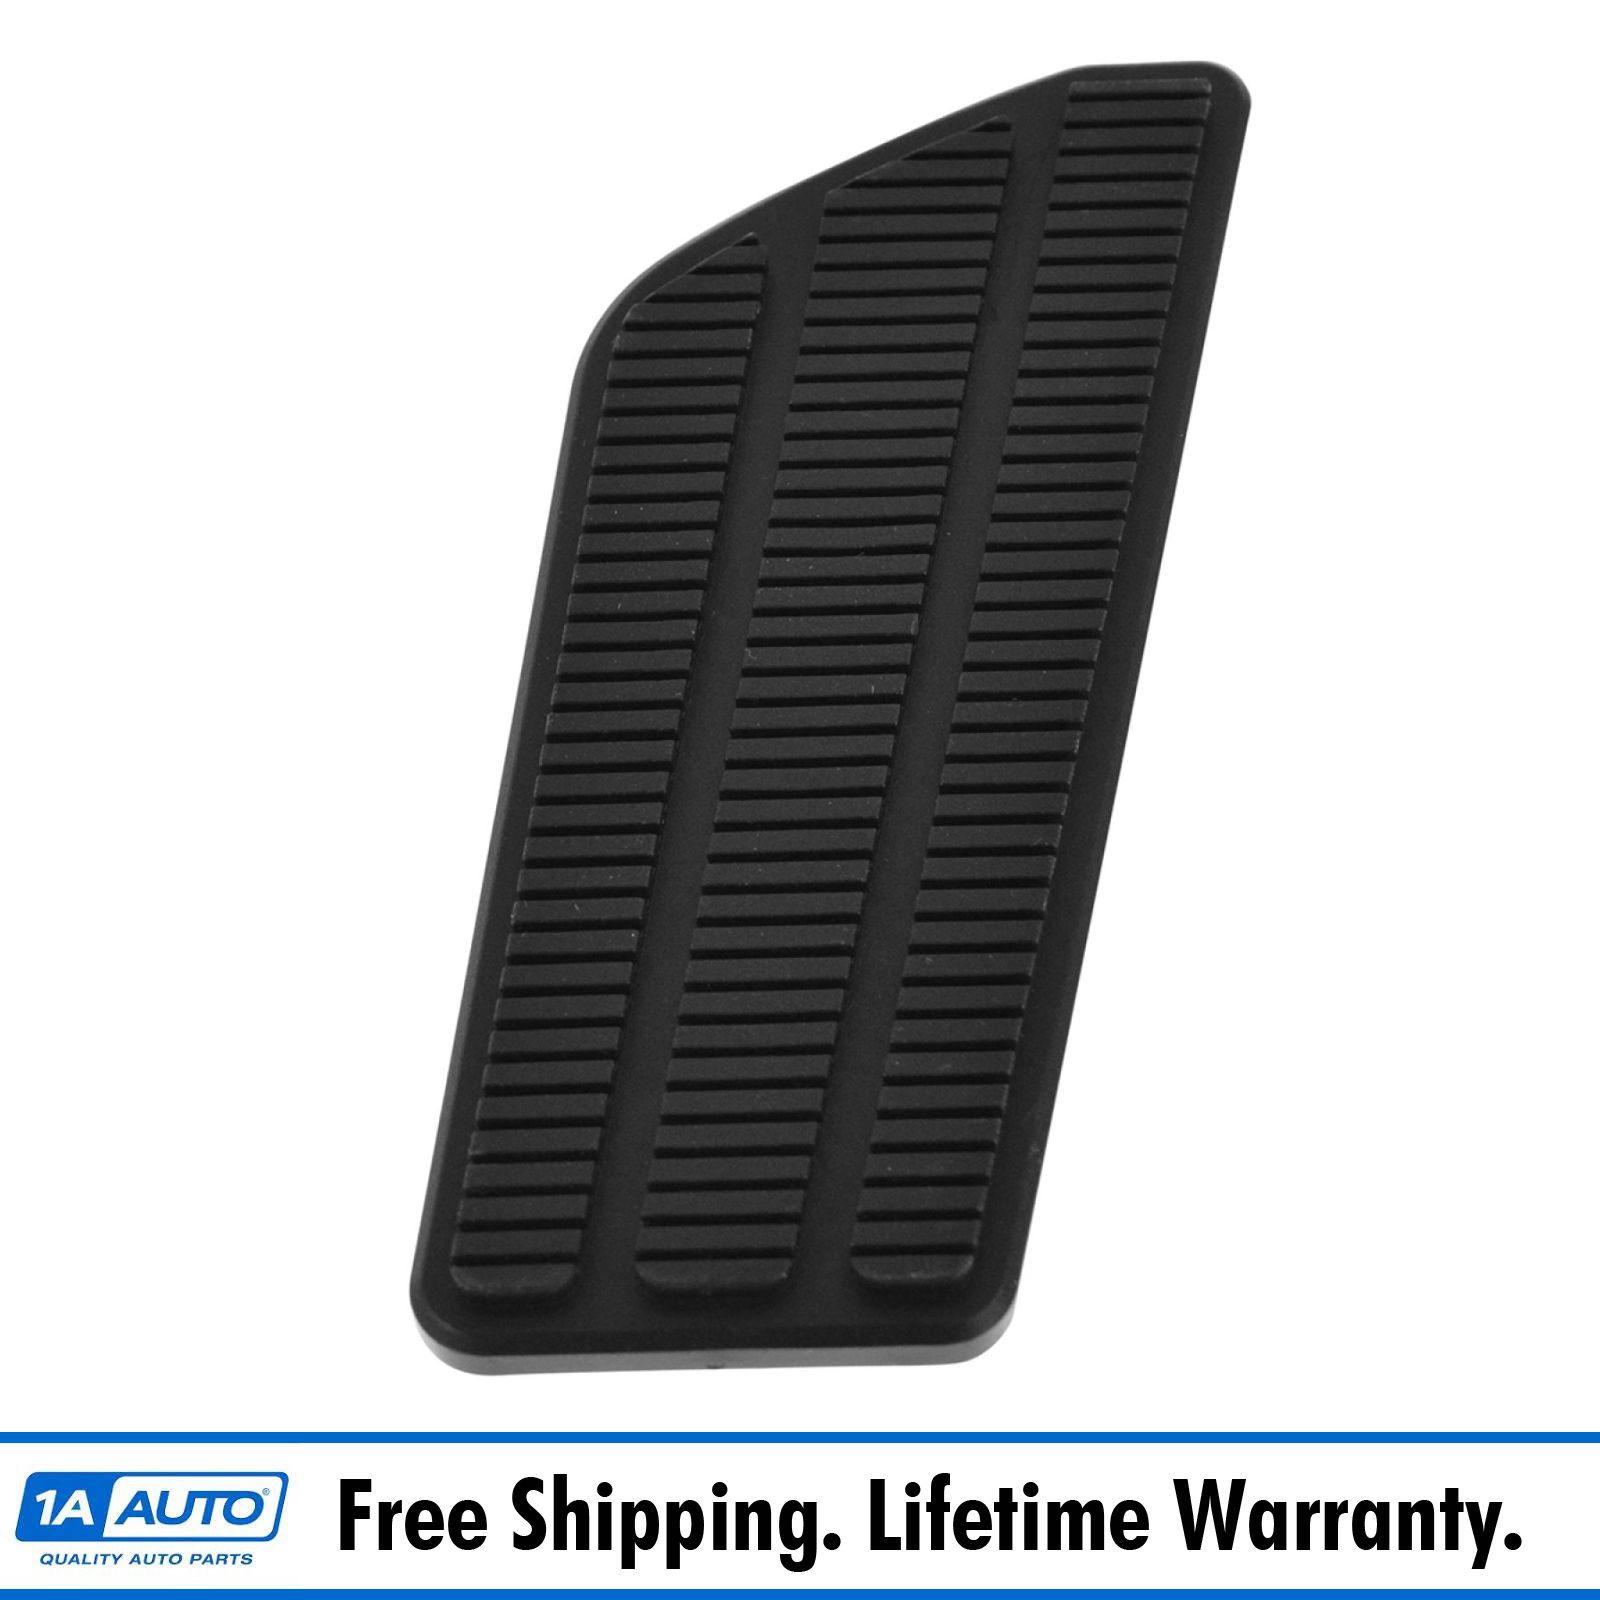 Car Truck Interior Parts Oem Accelerator Gas Pedal Rubber